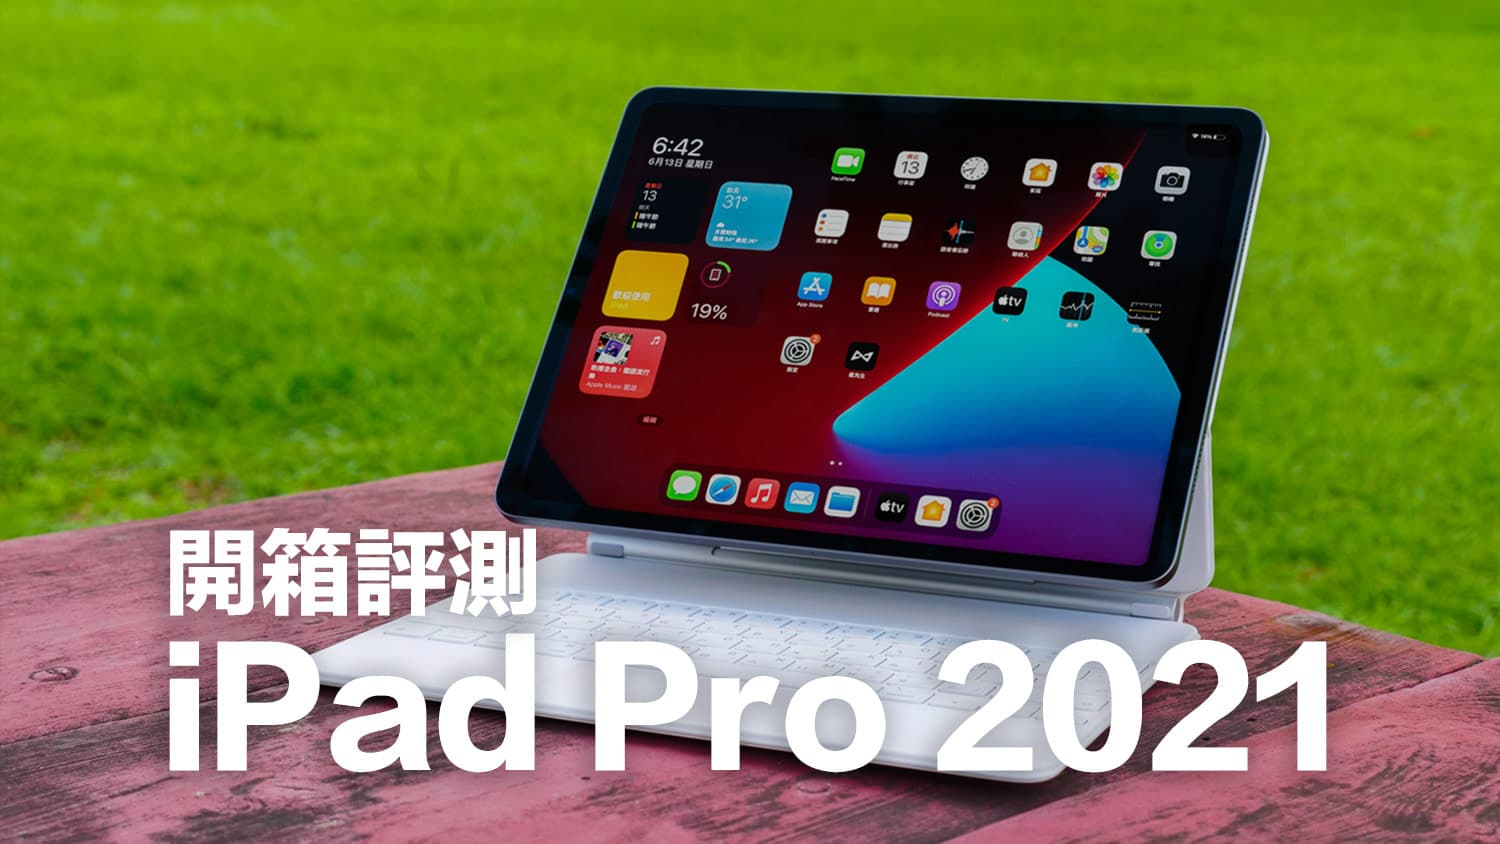 ipad pro 2021 unboxing cover